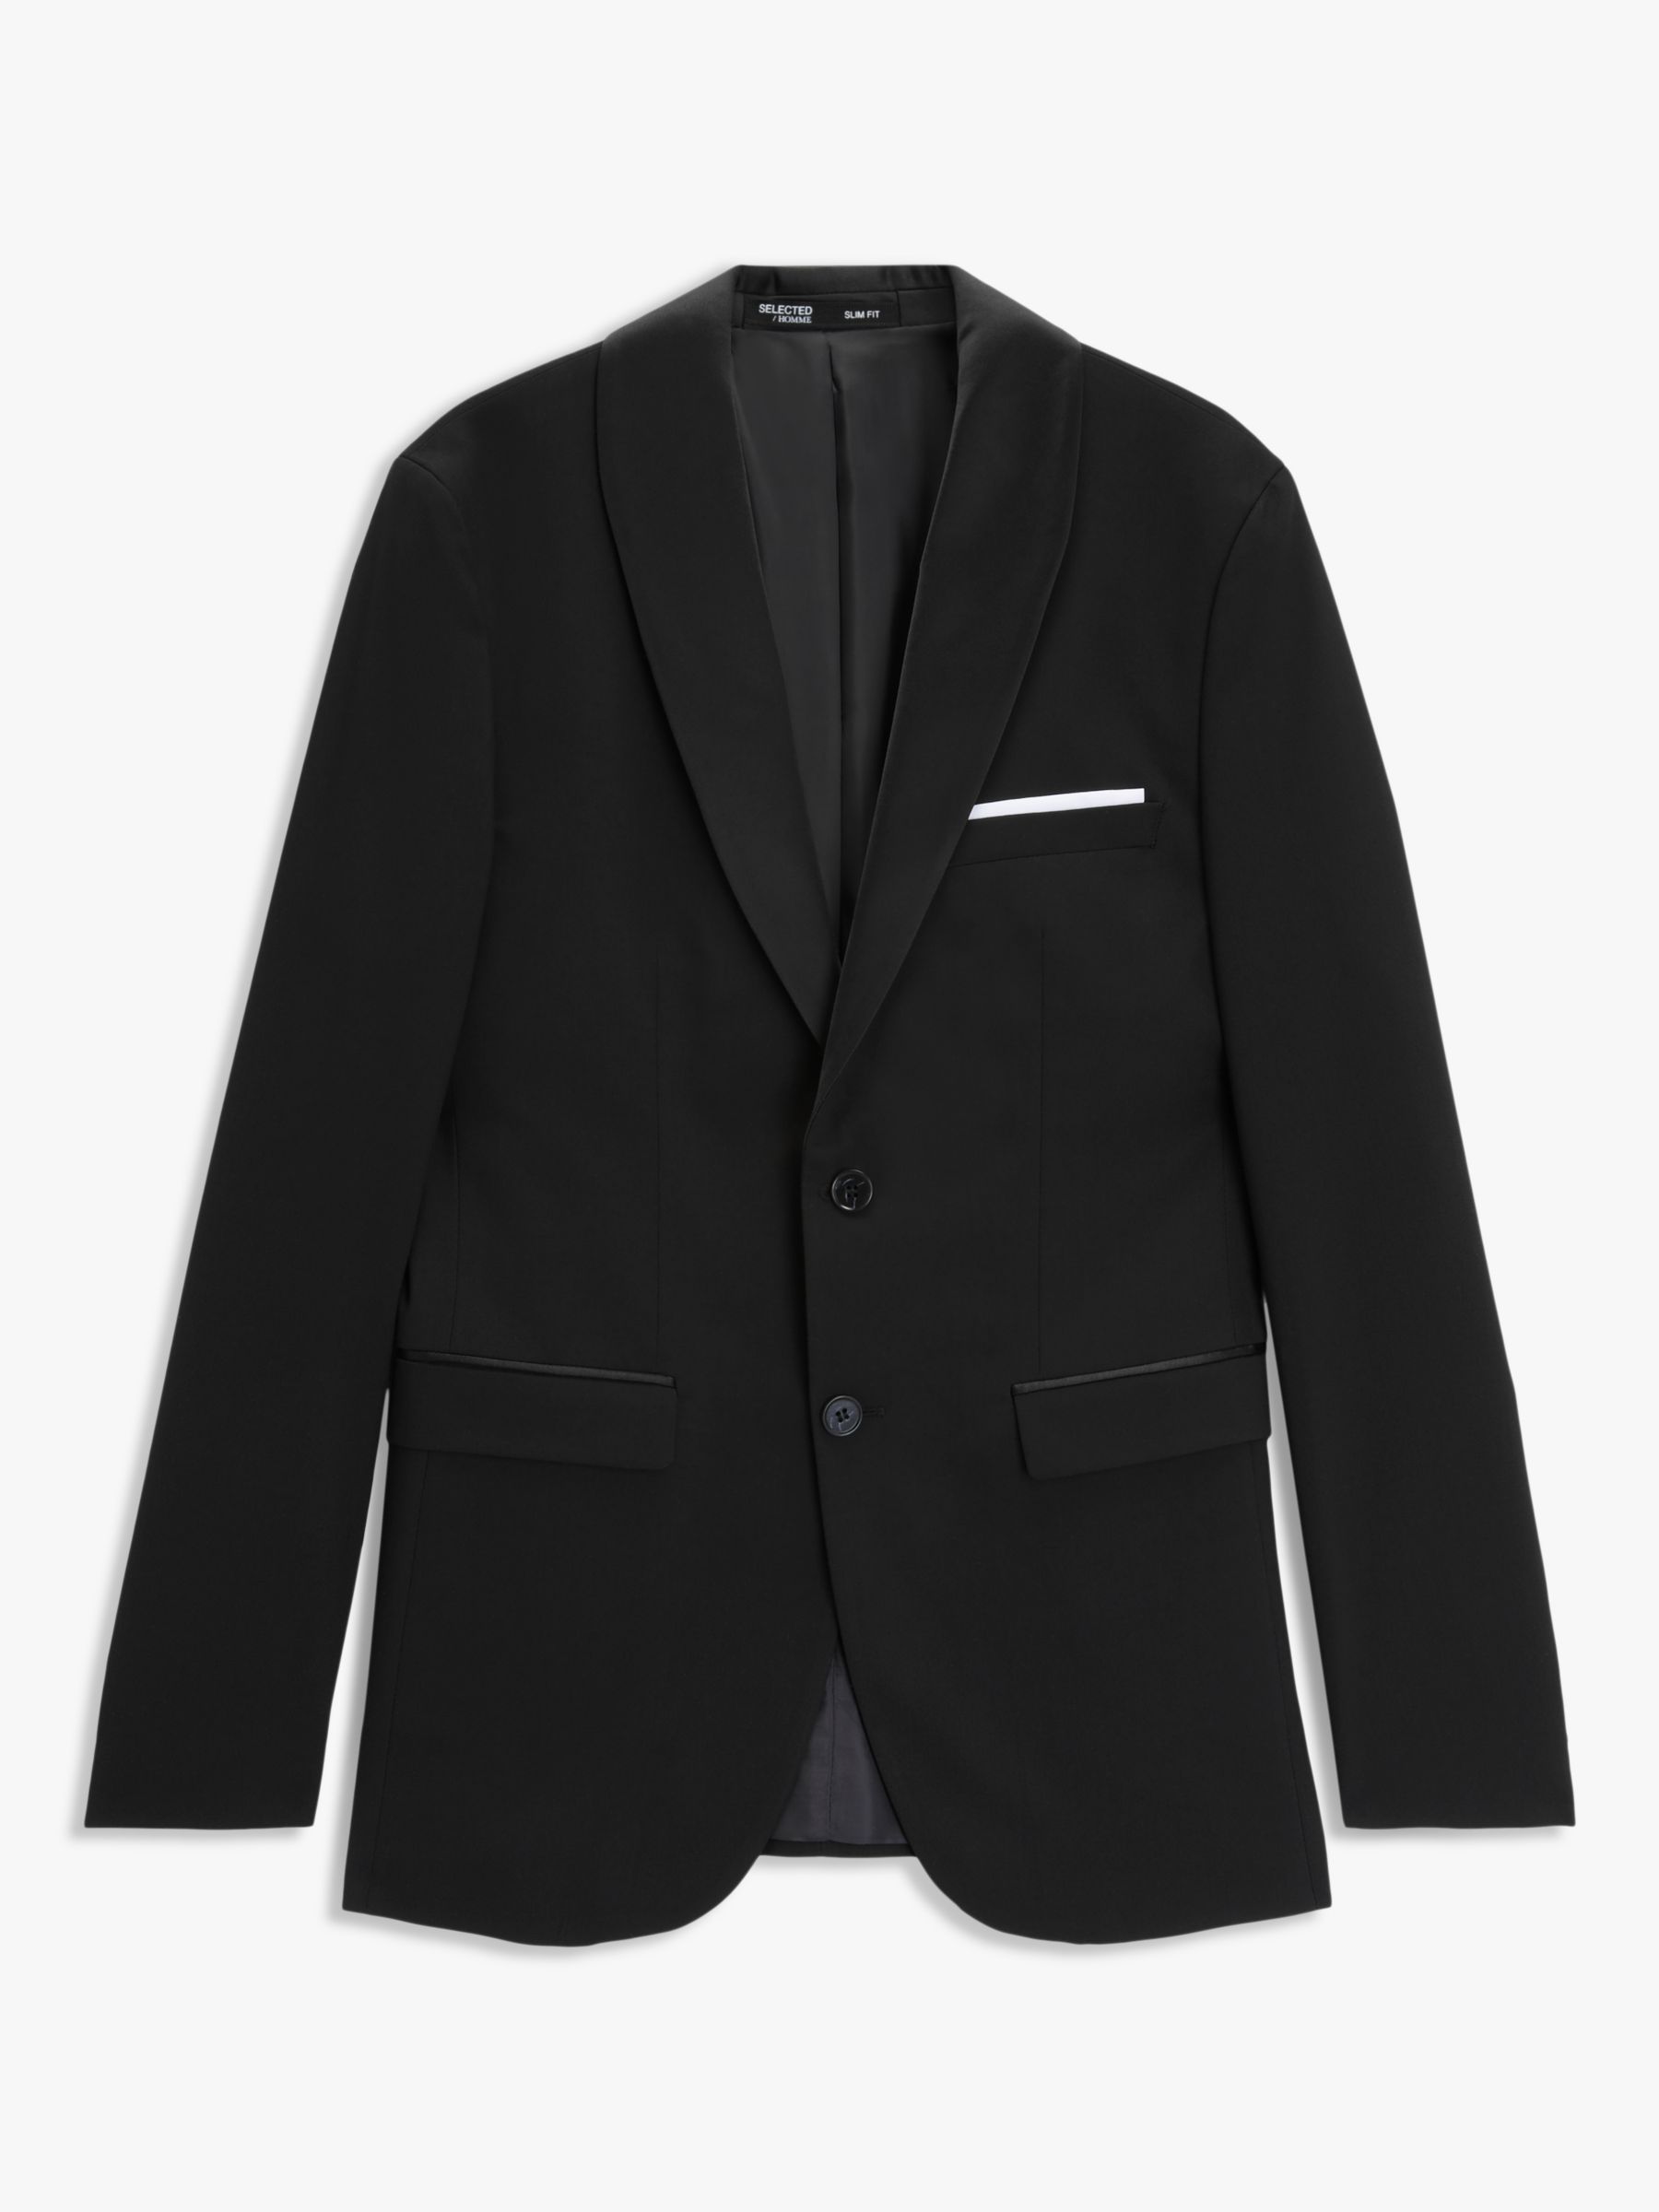 SELECTED HOMME Recycled Polyester Tux Dinner Jacket, Black at John ...